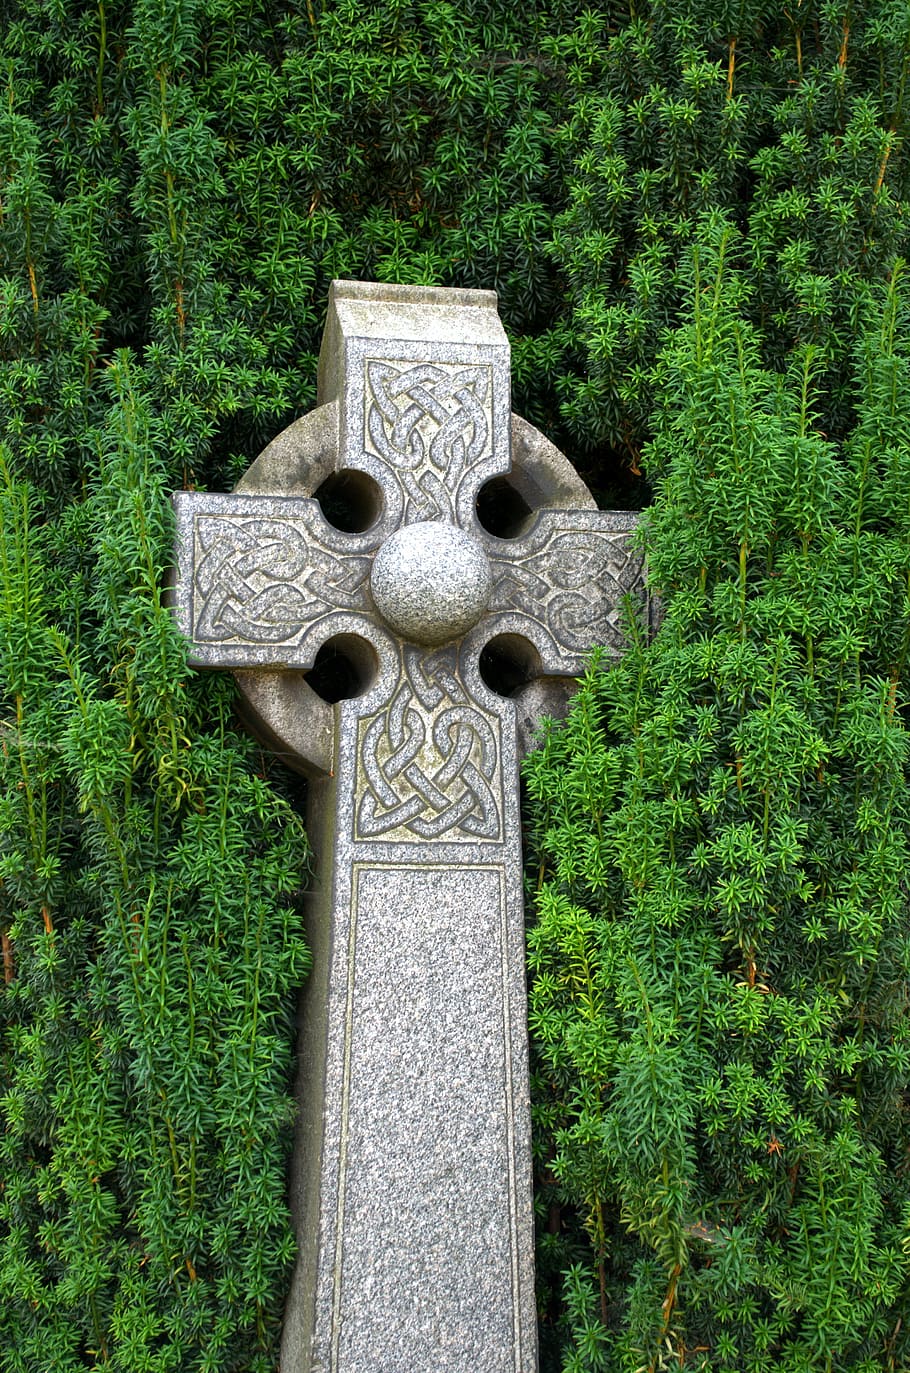 celtic cross, celts, scotland, cemetery, grave, tombstone, ancient, history, gravestone, old